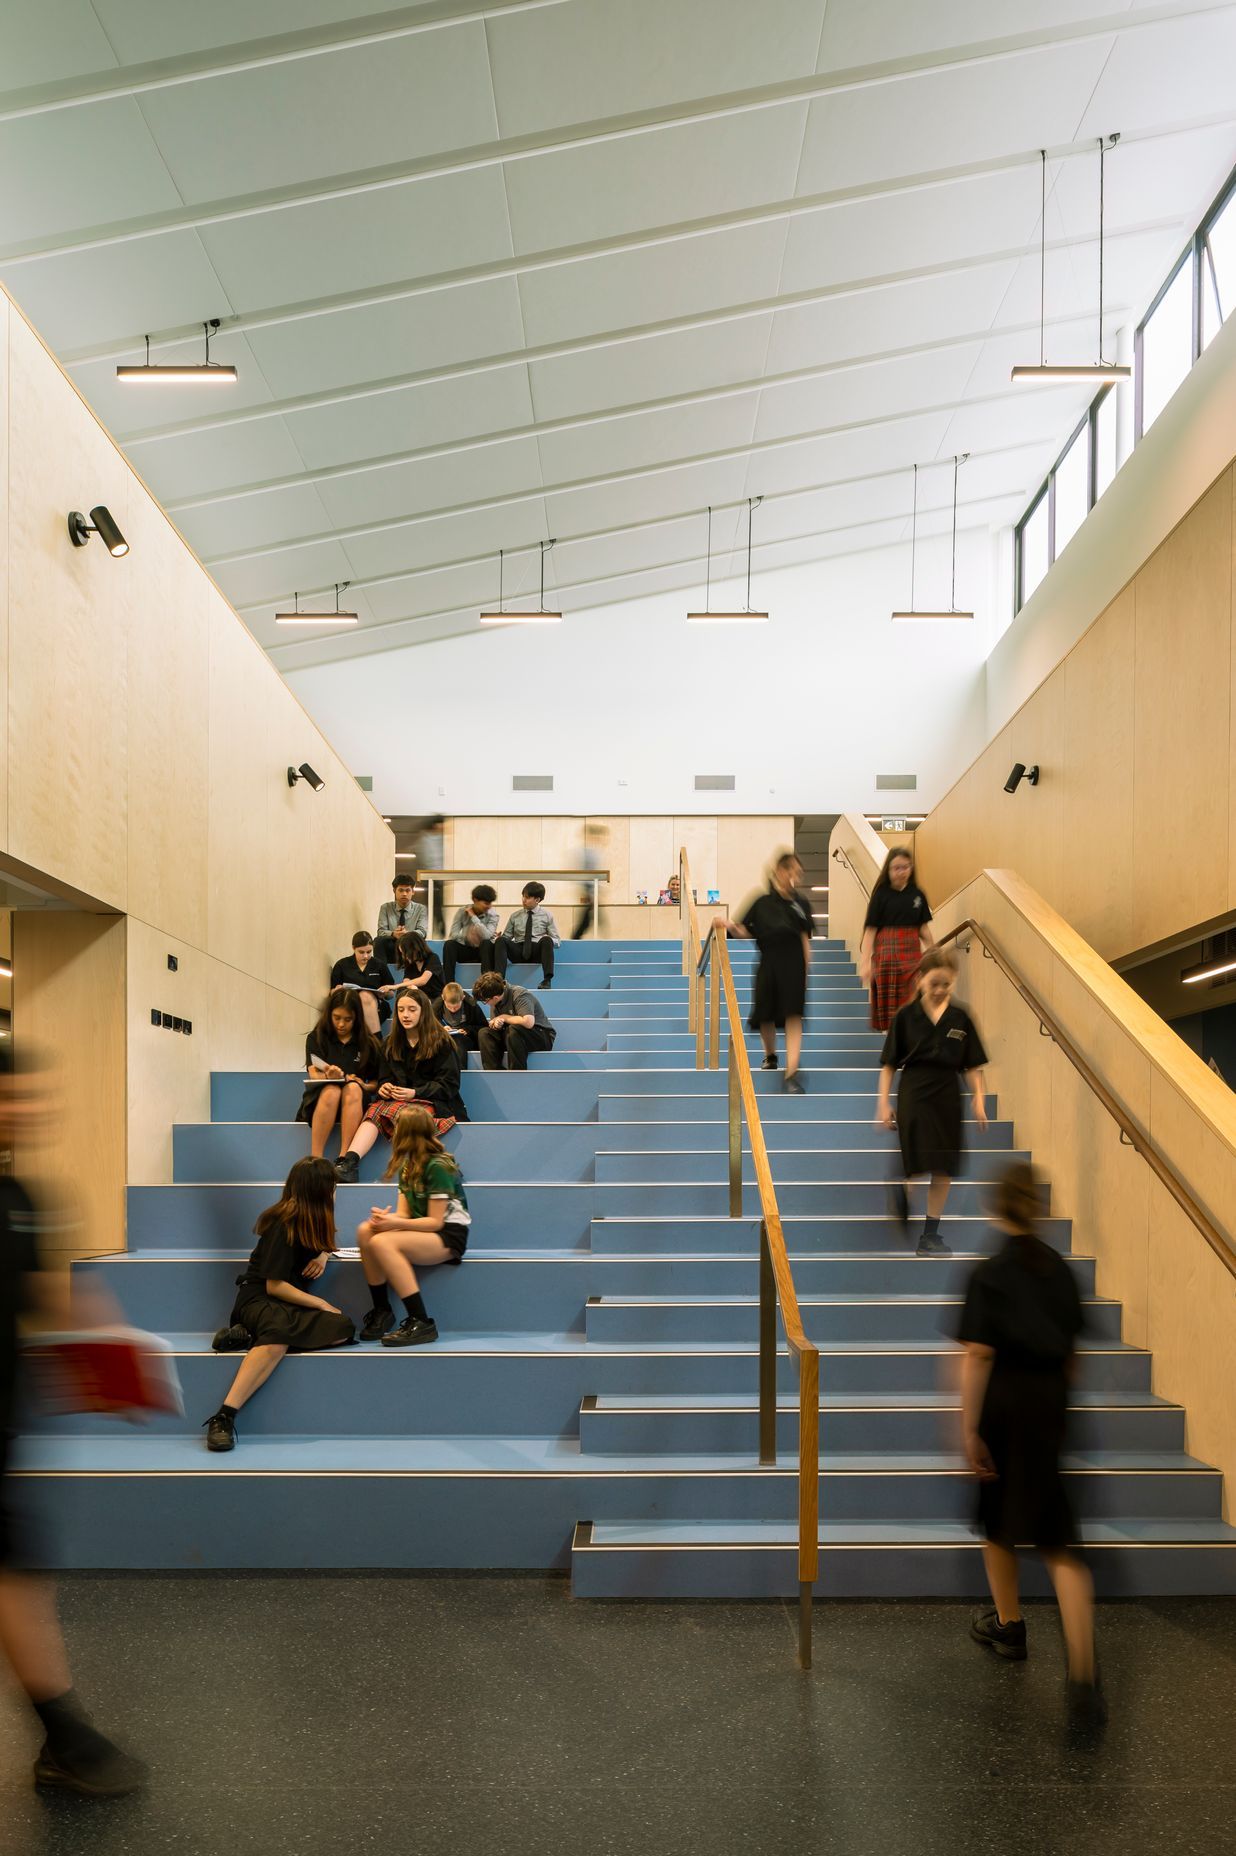 In the creativity and innovation hub the main stairwell is designed to be a gathering space at break times.